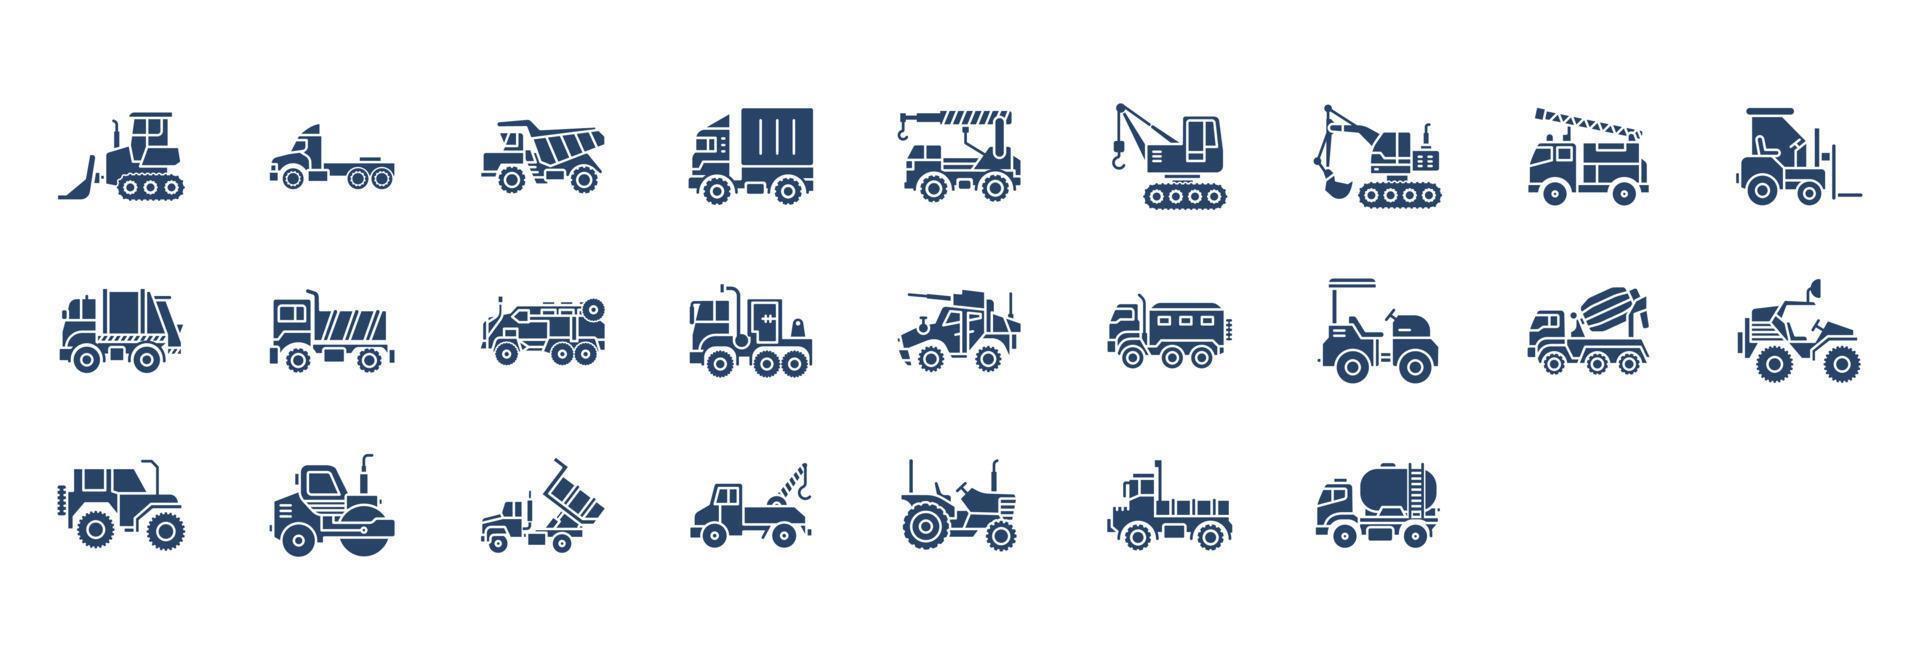 Collection of icons related to Vehicles, including icons like crane, Fire truck, Truck,  and more. vector illustrations, Pixel Perfect set